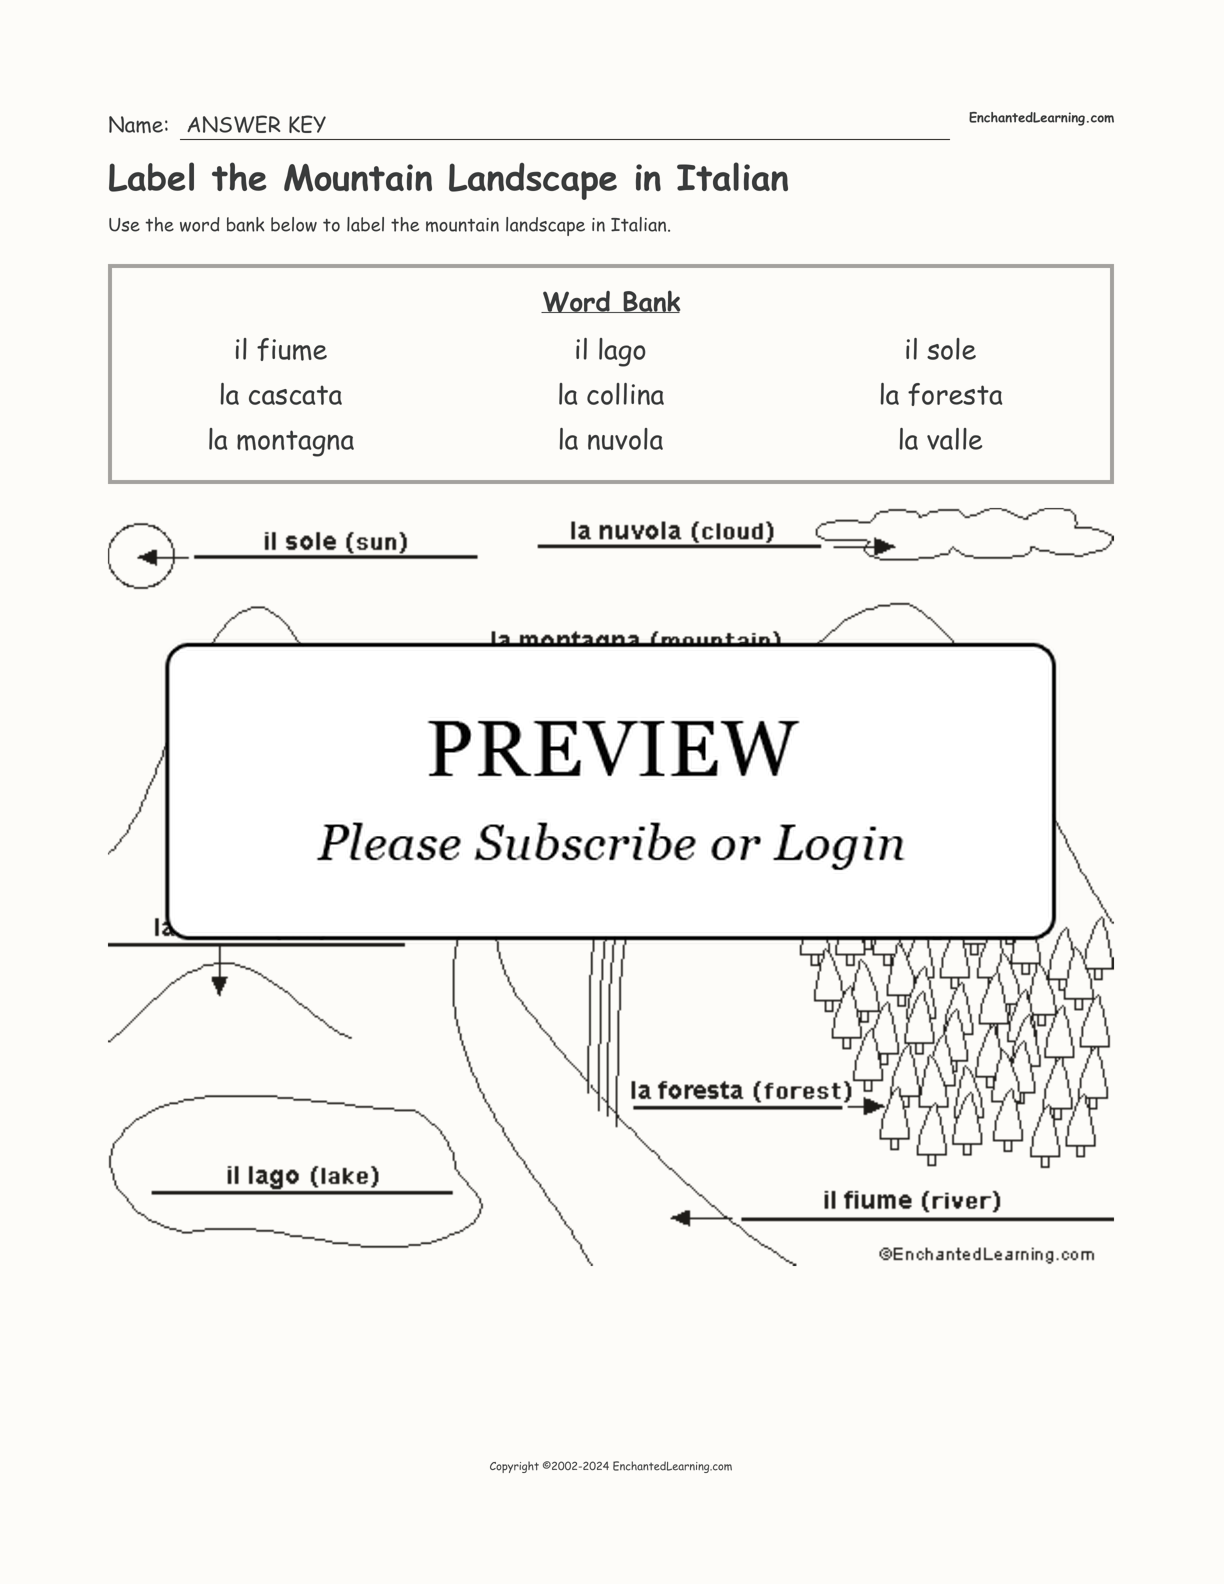 Label the Mountain Landscape in Italian interactive worksheet page 2